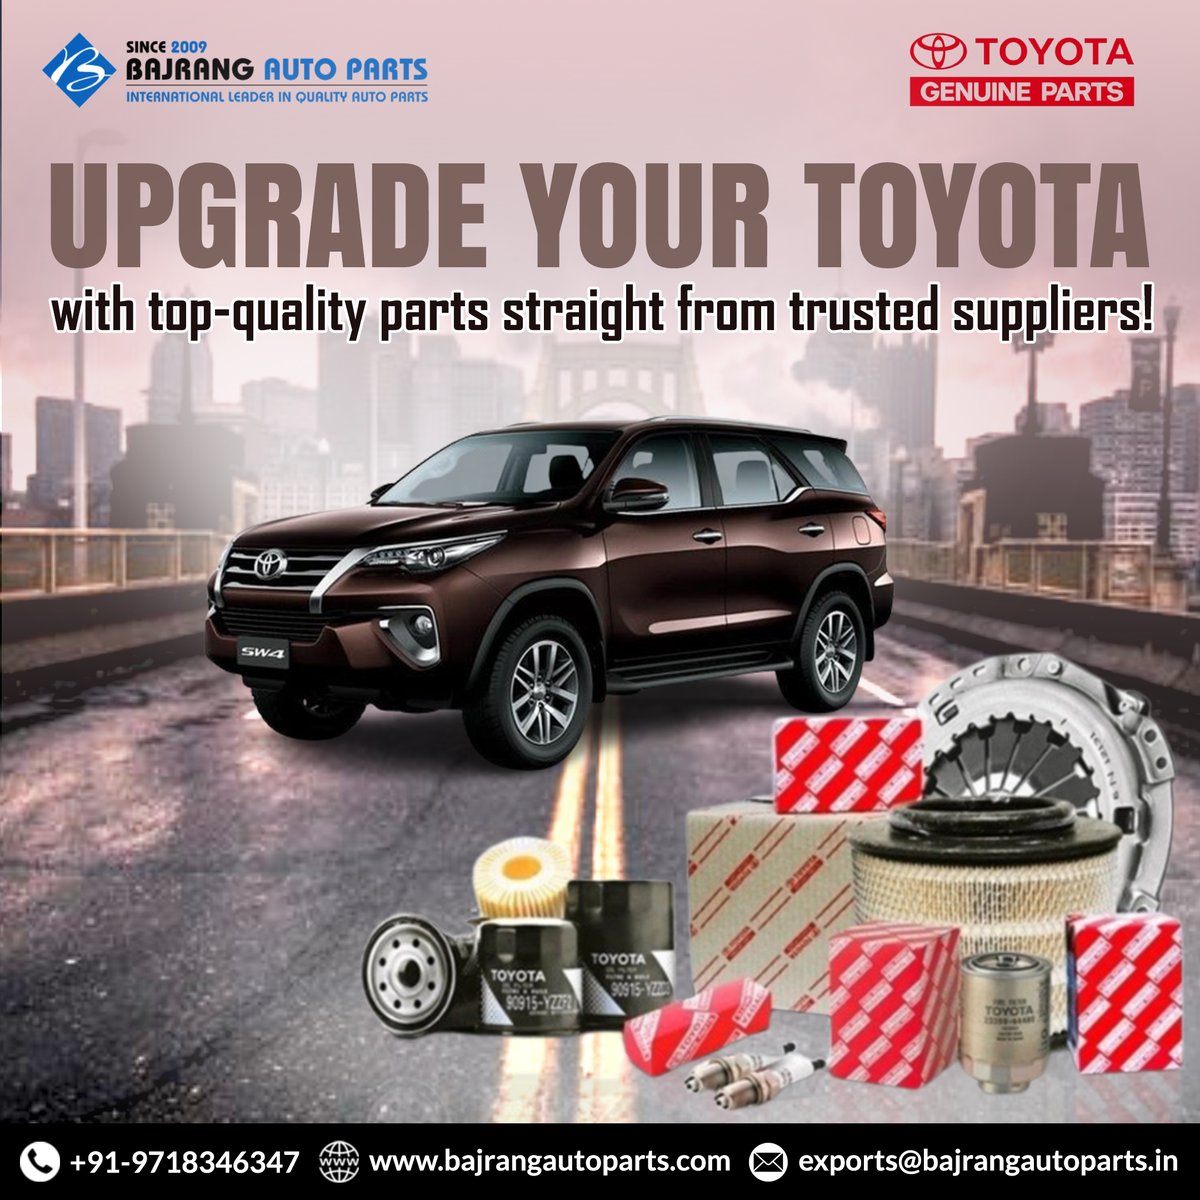 Take your Toyota to the next level with premium parts from Bajrang Auto Parts! Ensure peak performance and reliability with our top-quality upgrades.
#bajrangautoparts
#toyotaupgrade #qualityparts #trustedsuppliers #toyotaperformance #autoparts #carmaintenance #vehicleupgrades